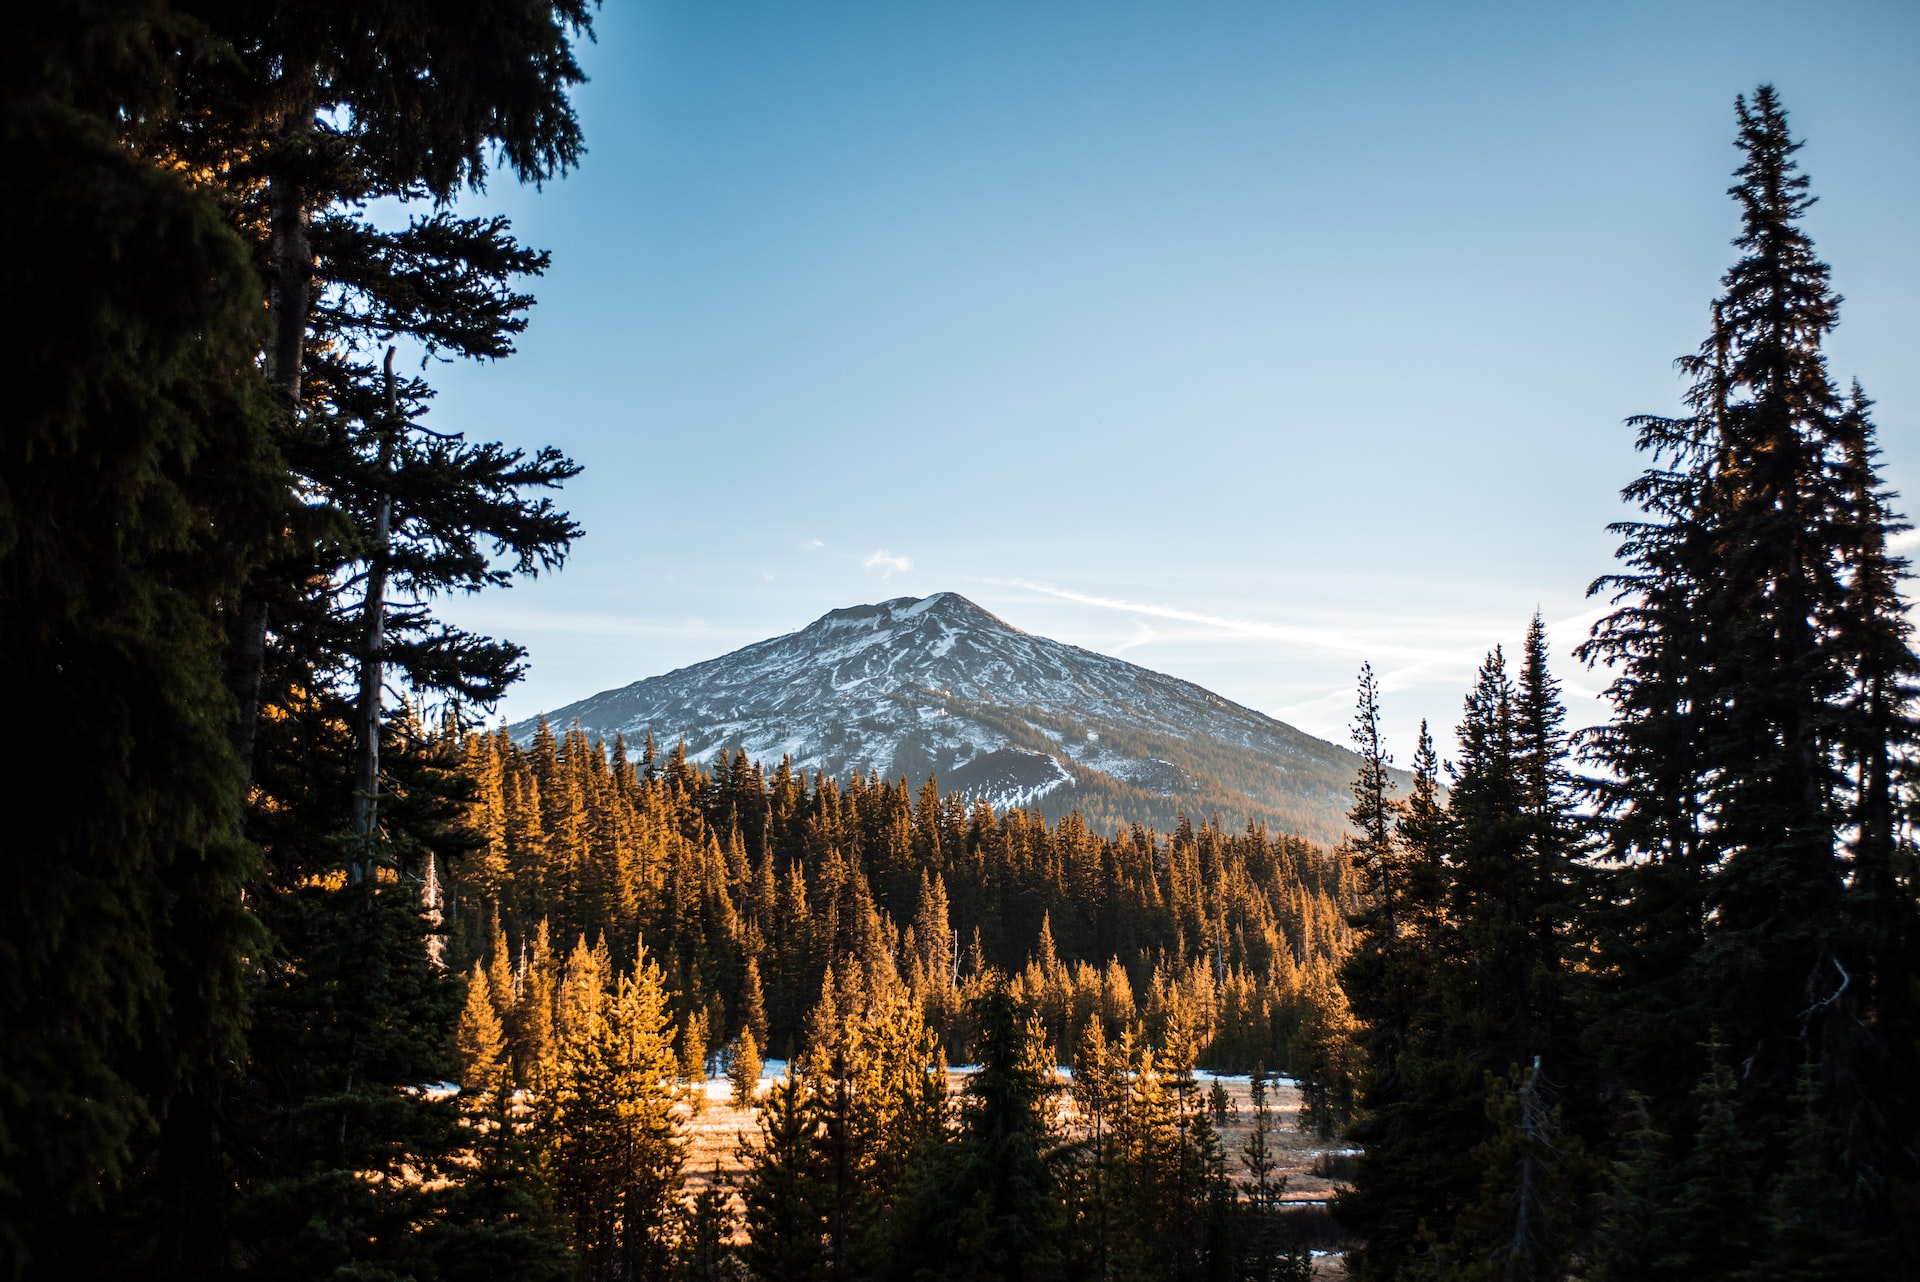 Mount Bachelor covered in snow in the fall.